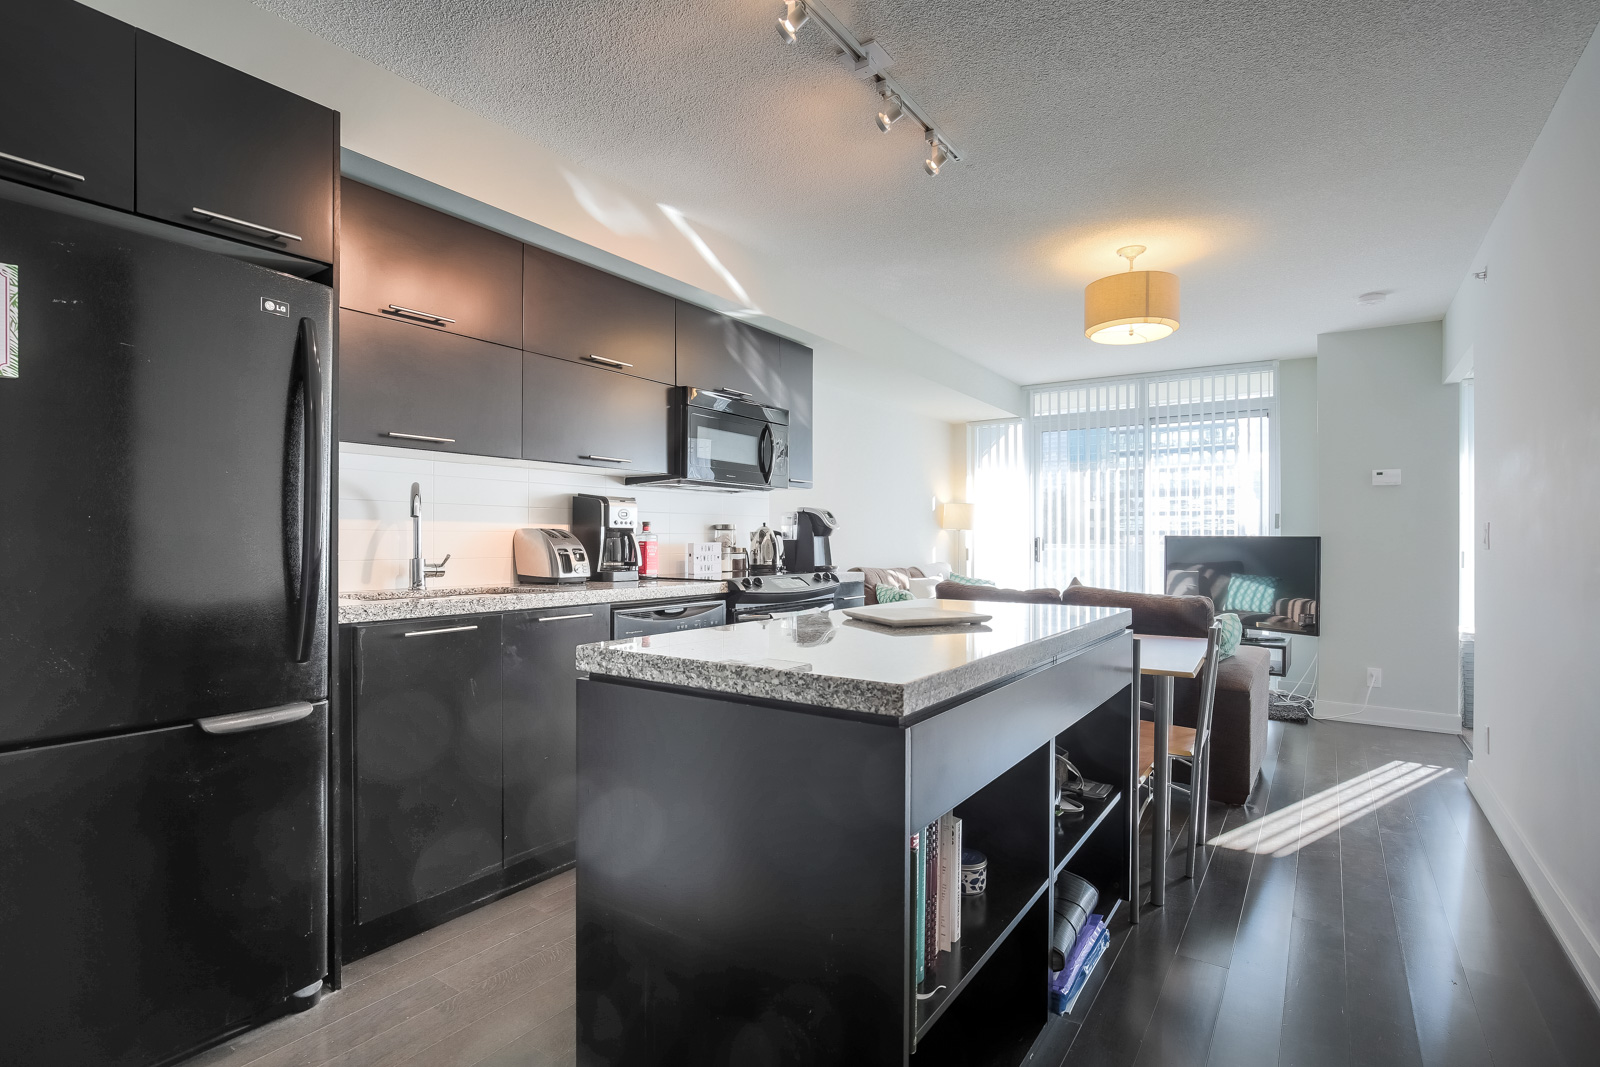 View of condo interior showing modern, open-concept design, hardwood floors & stainless steel appliances